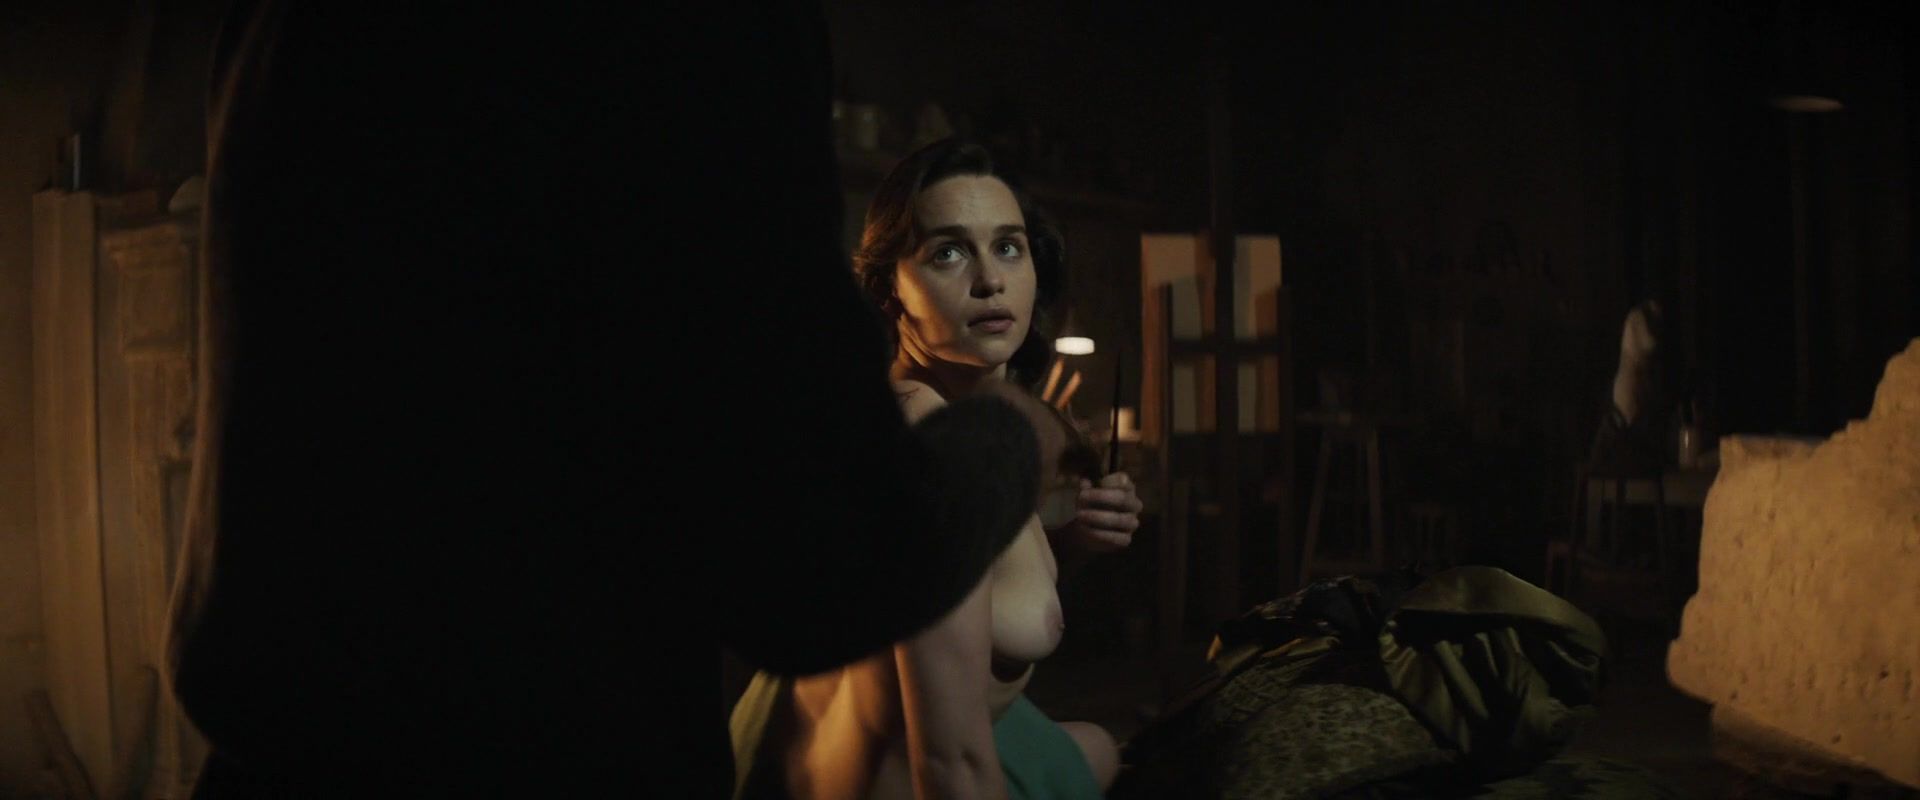 javx Naked Emilia Clarke in topless scene of the movie "Voice from the Stone" | Released in 2017 Gemendo